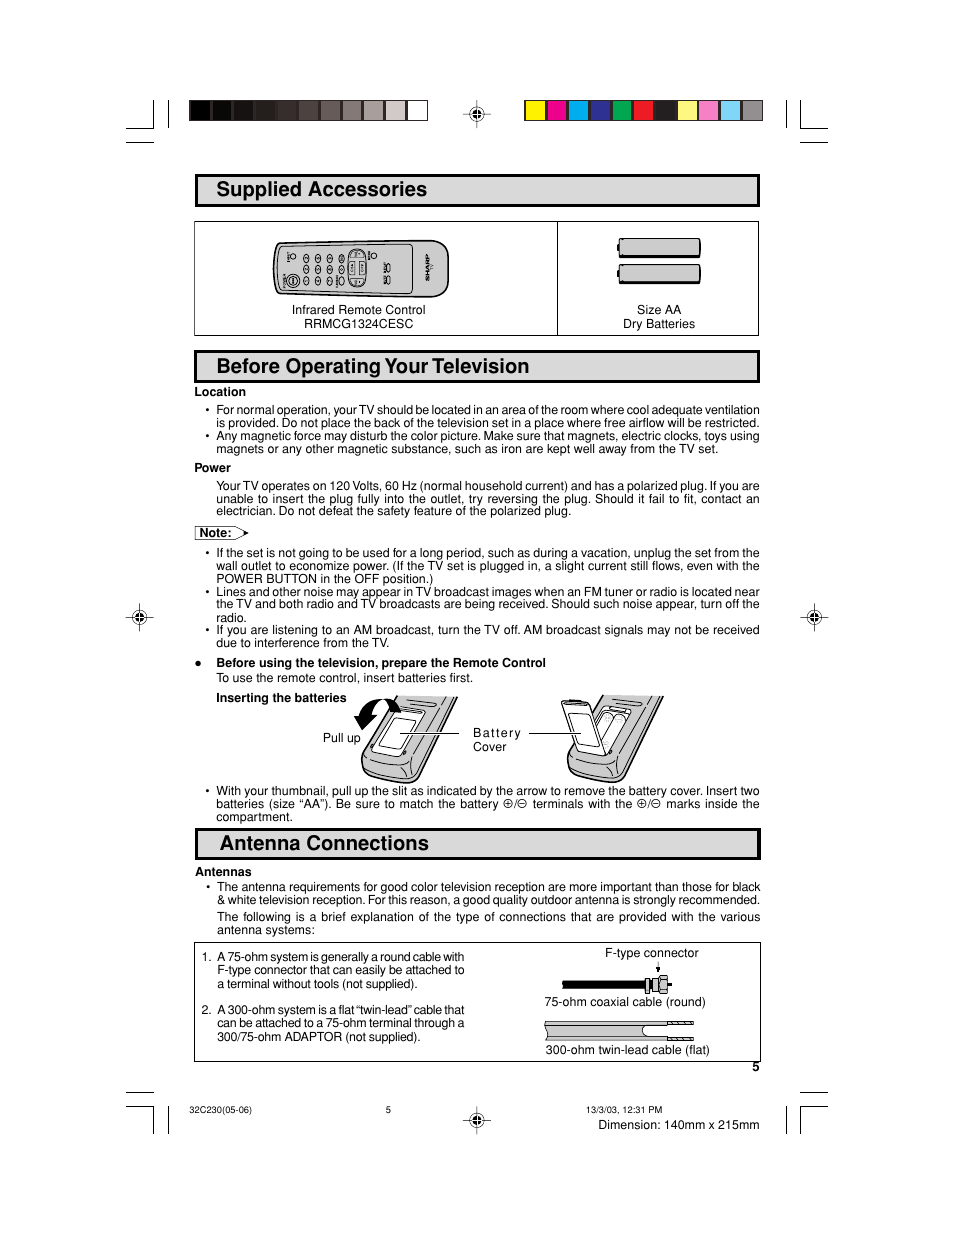 Supplied accessories, Before operating your television, Antenna connections | Sharp 32C230 User Manual | Page 5 / 52